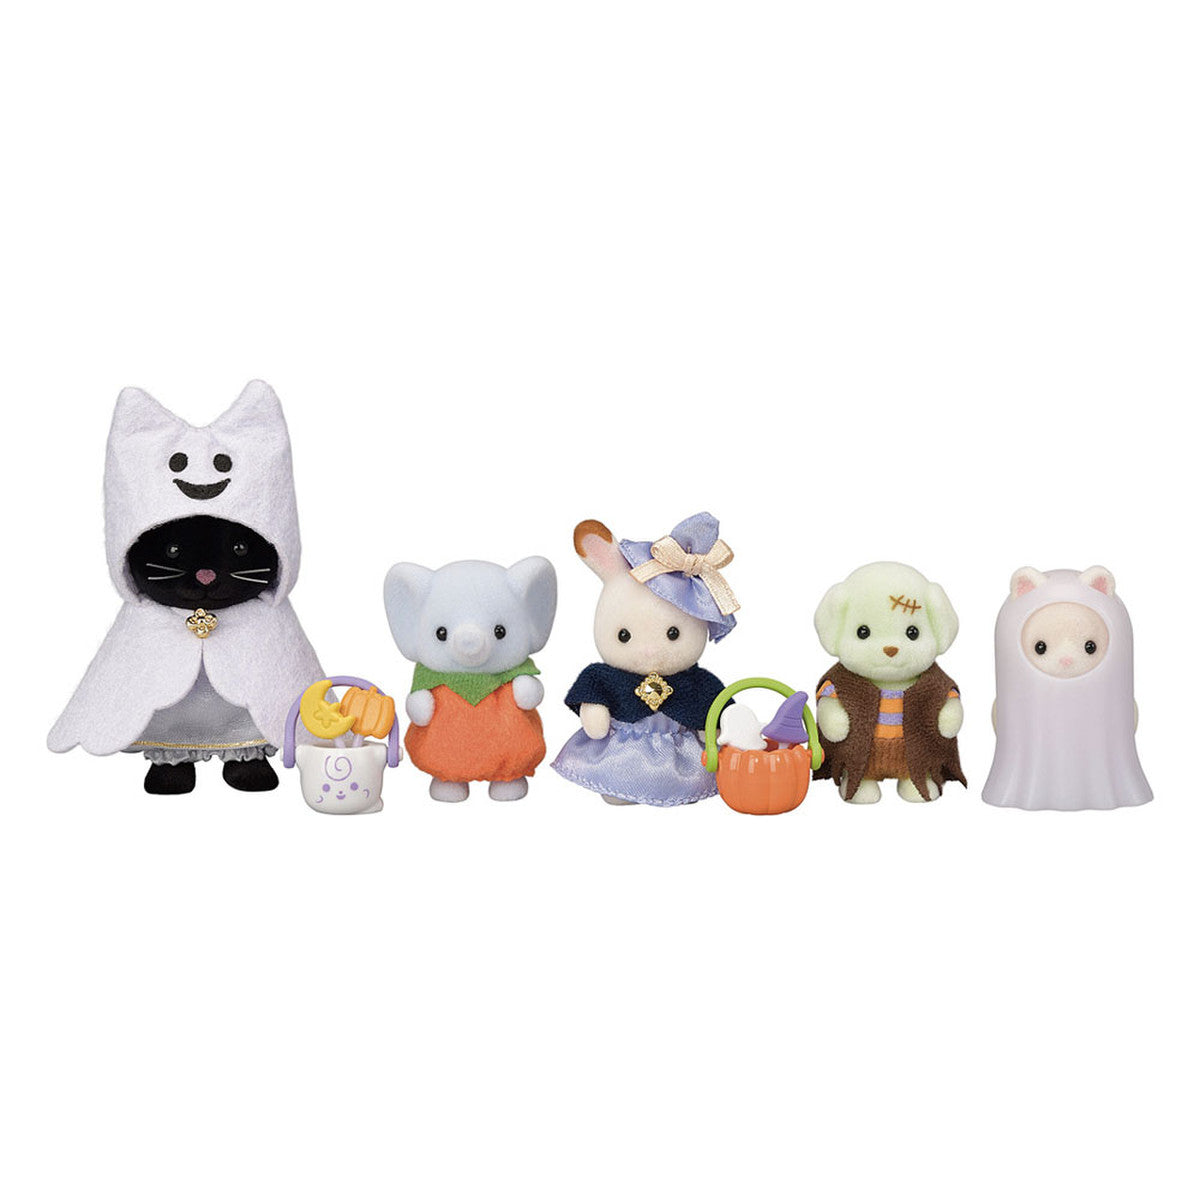 Trick or Treat Parade by Calico Critters #CC2027